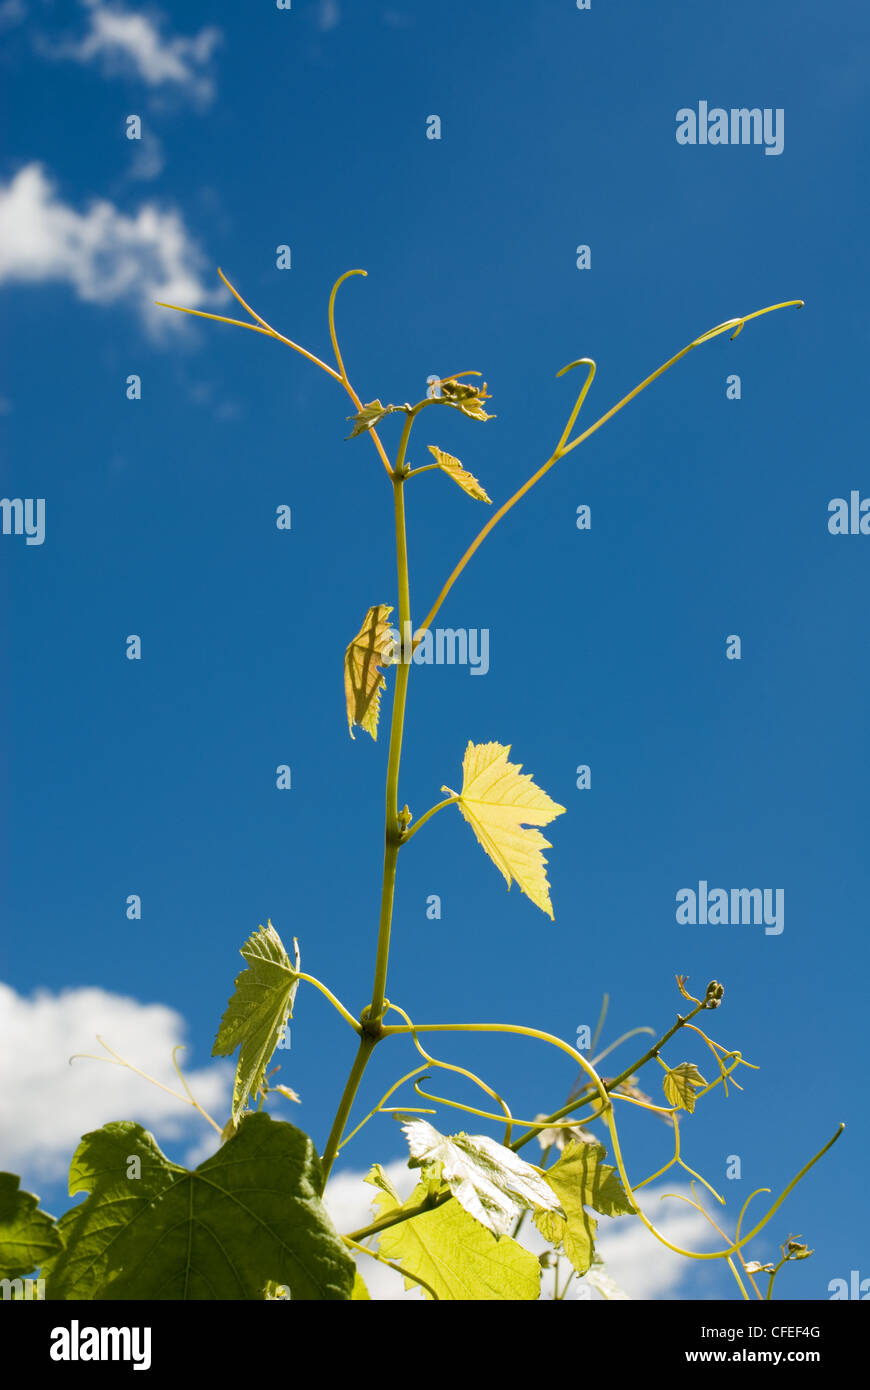 The new growth of a grapevine against a blue sky Stock Photo